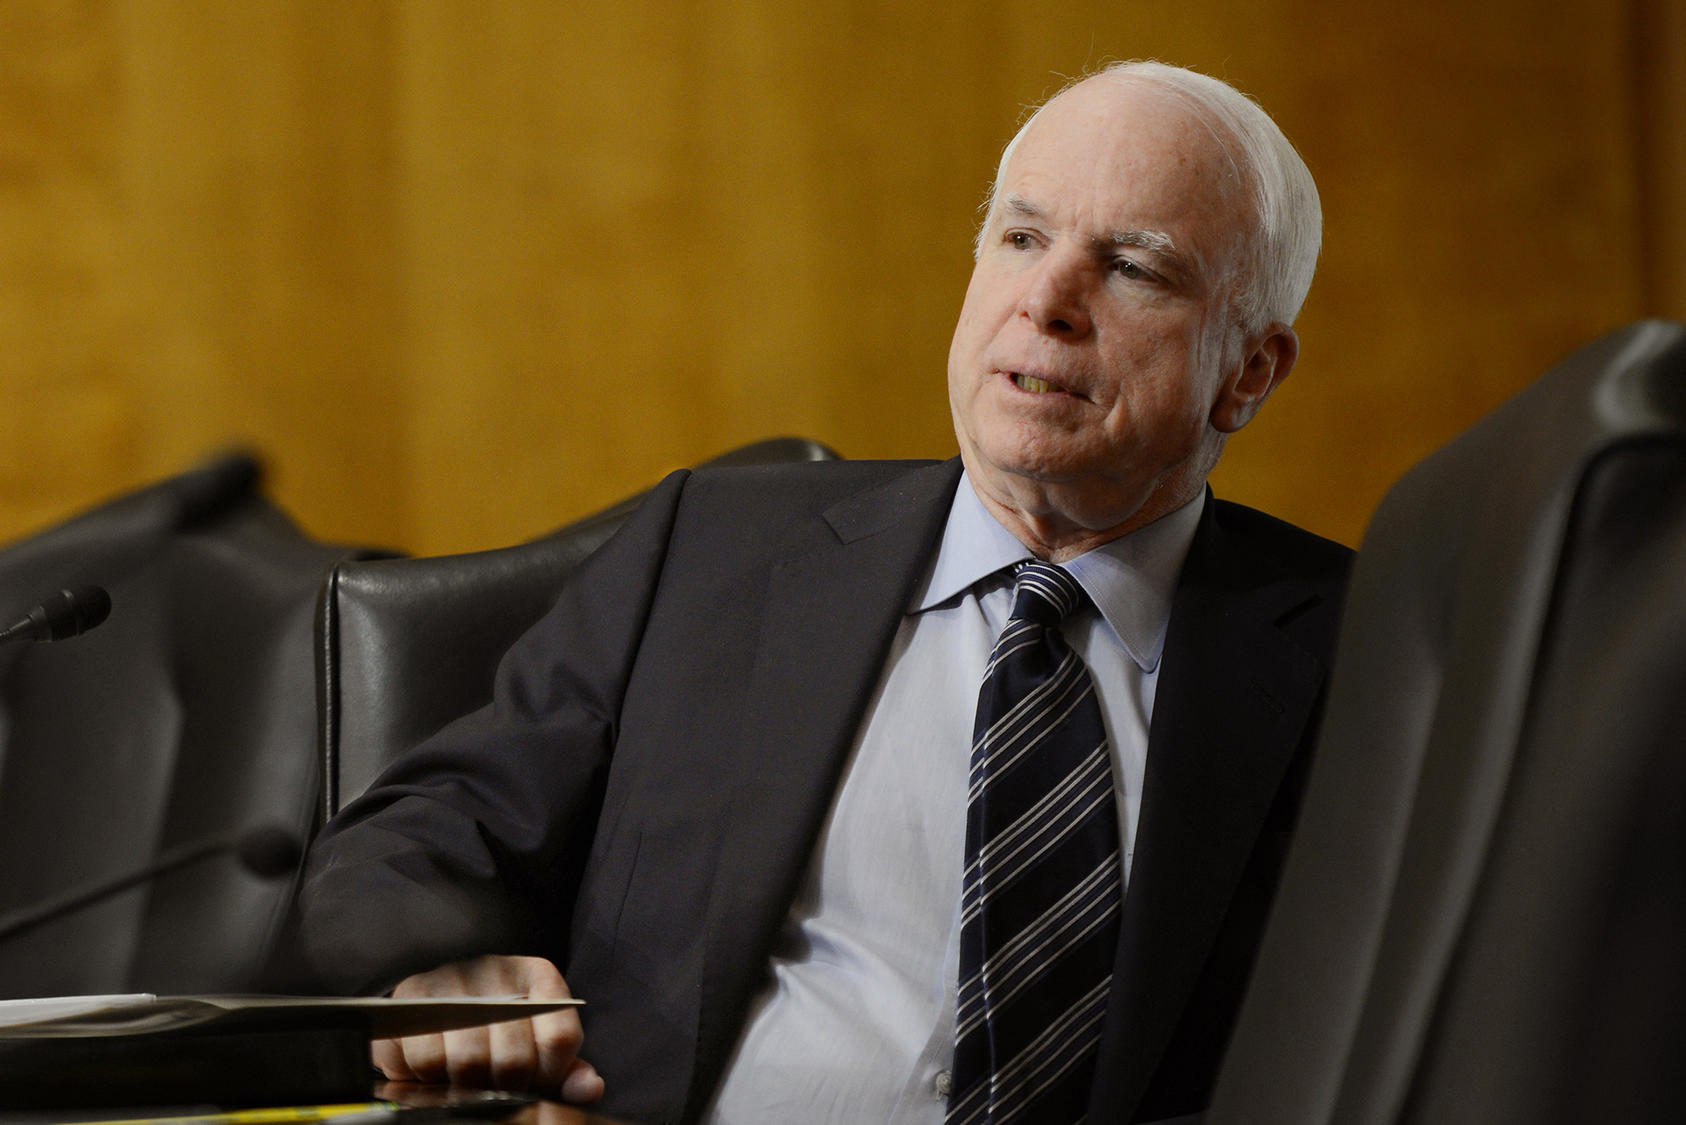 Senator John McCain listens to testimony from USIP staff member Andrew Wilder at a hearing on the war in Afghanistan in 2013.